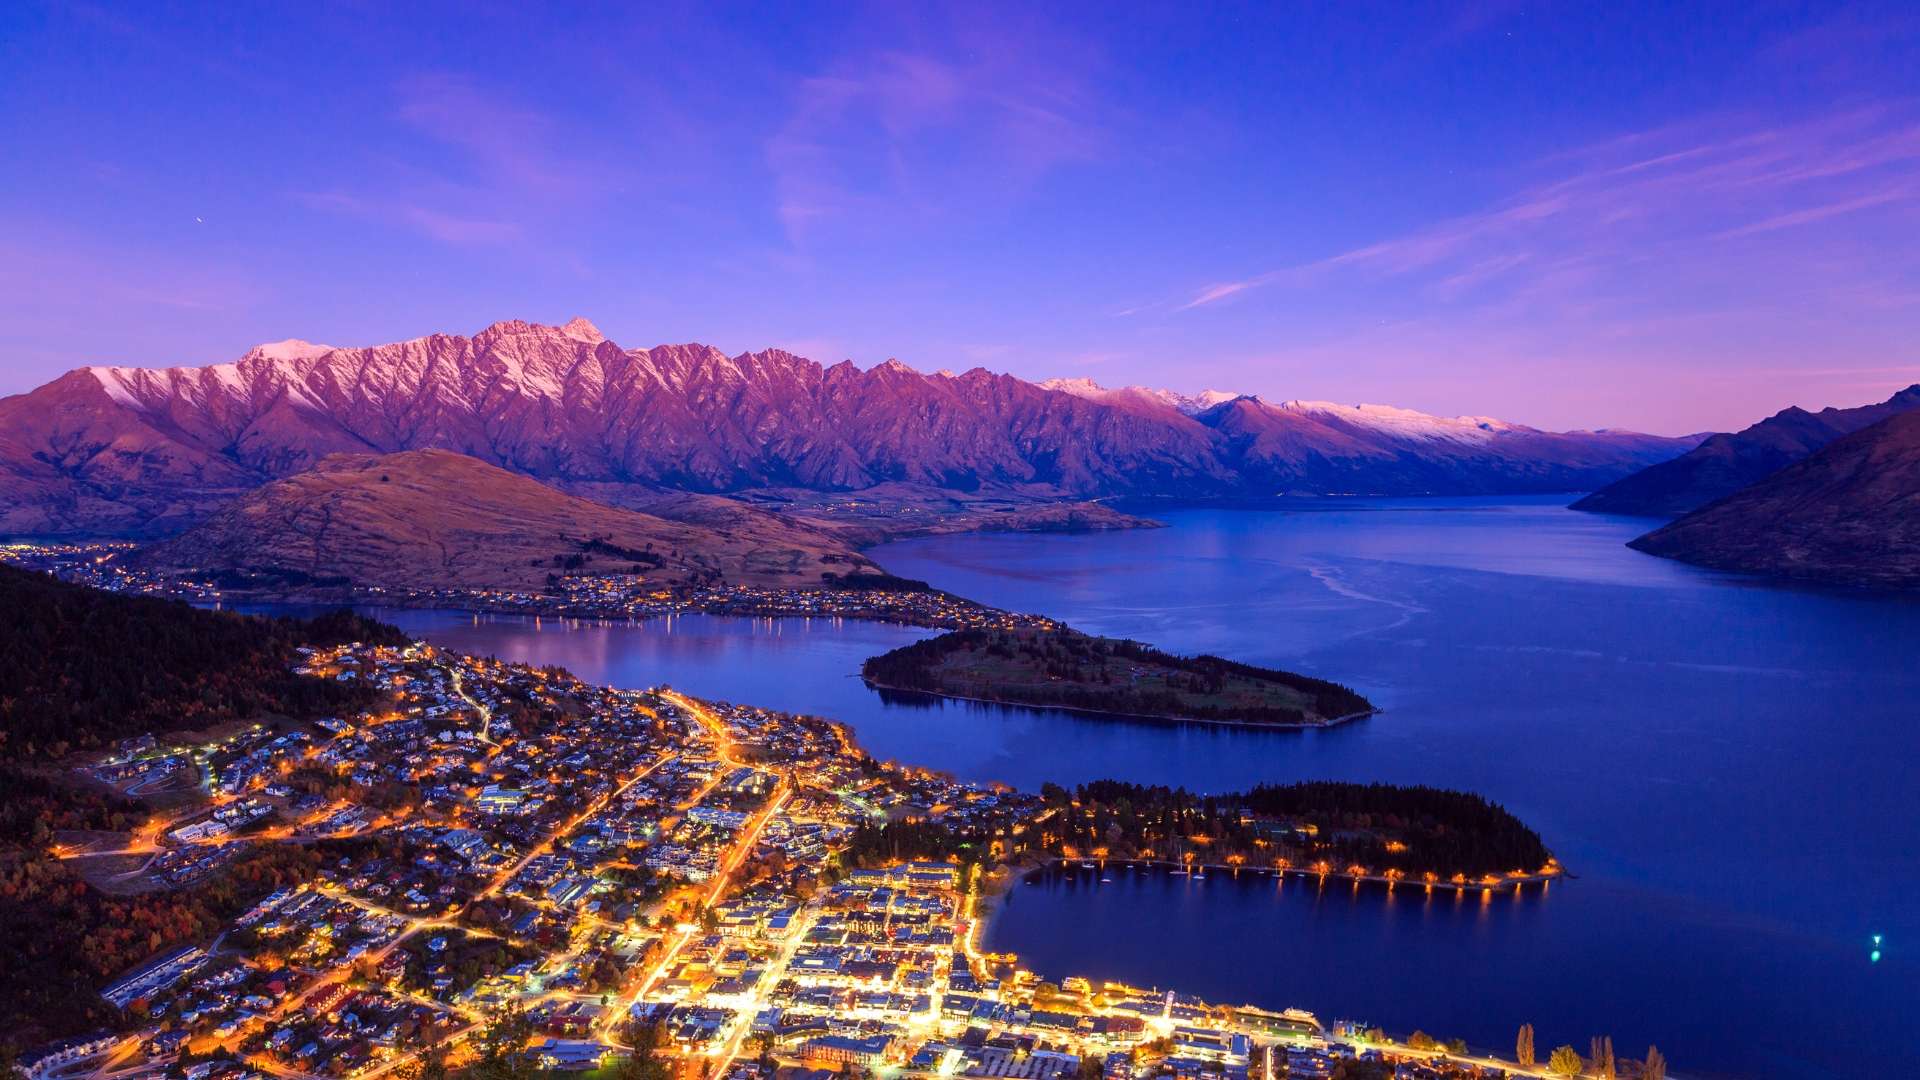 Queenstown Progressive Dinner Tour, Adults Only - Departs Queenstown Daily  (6:30pm to 9:30pm)